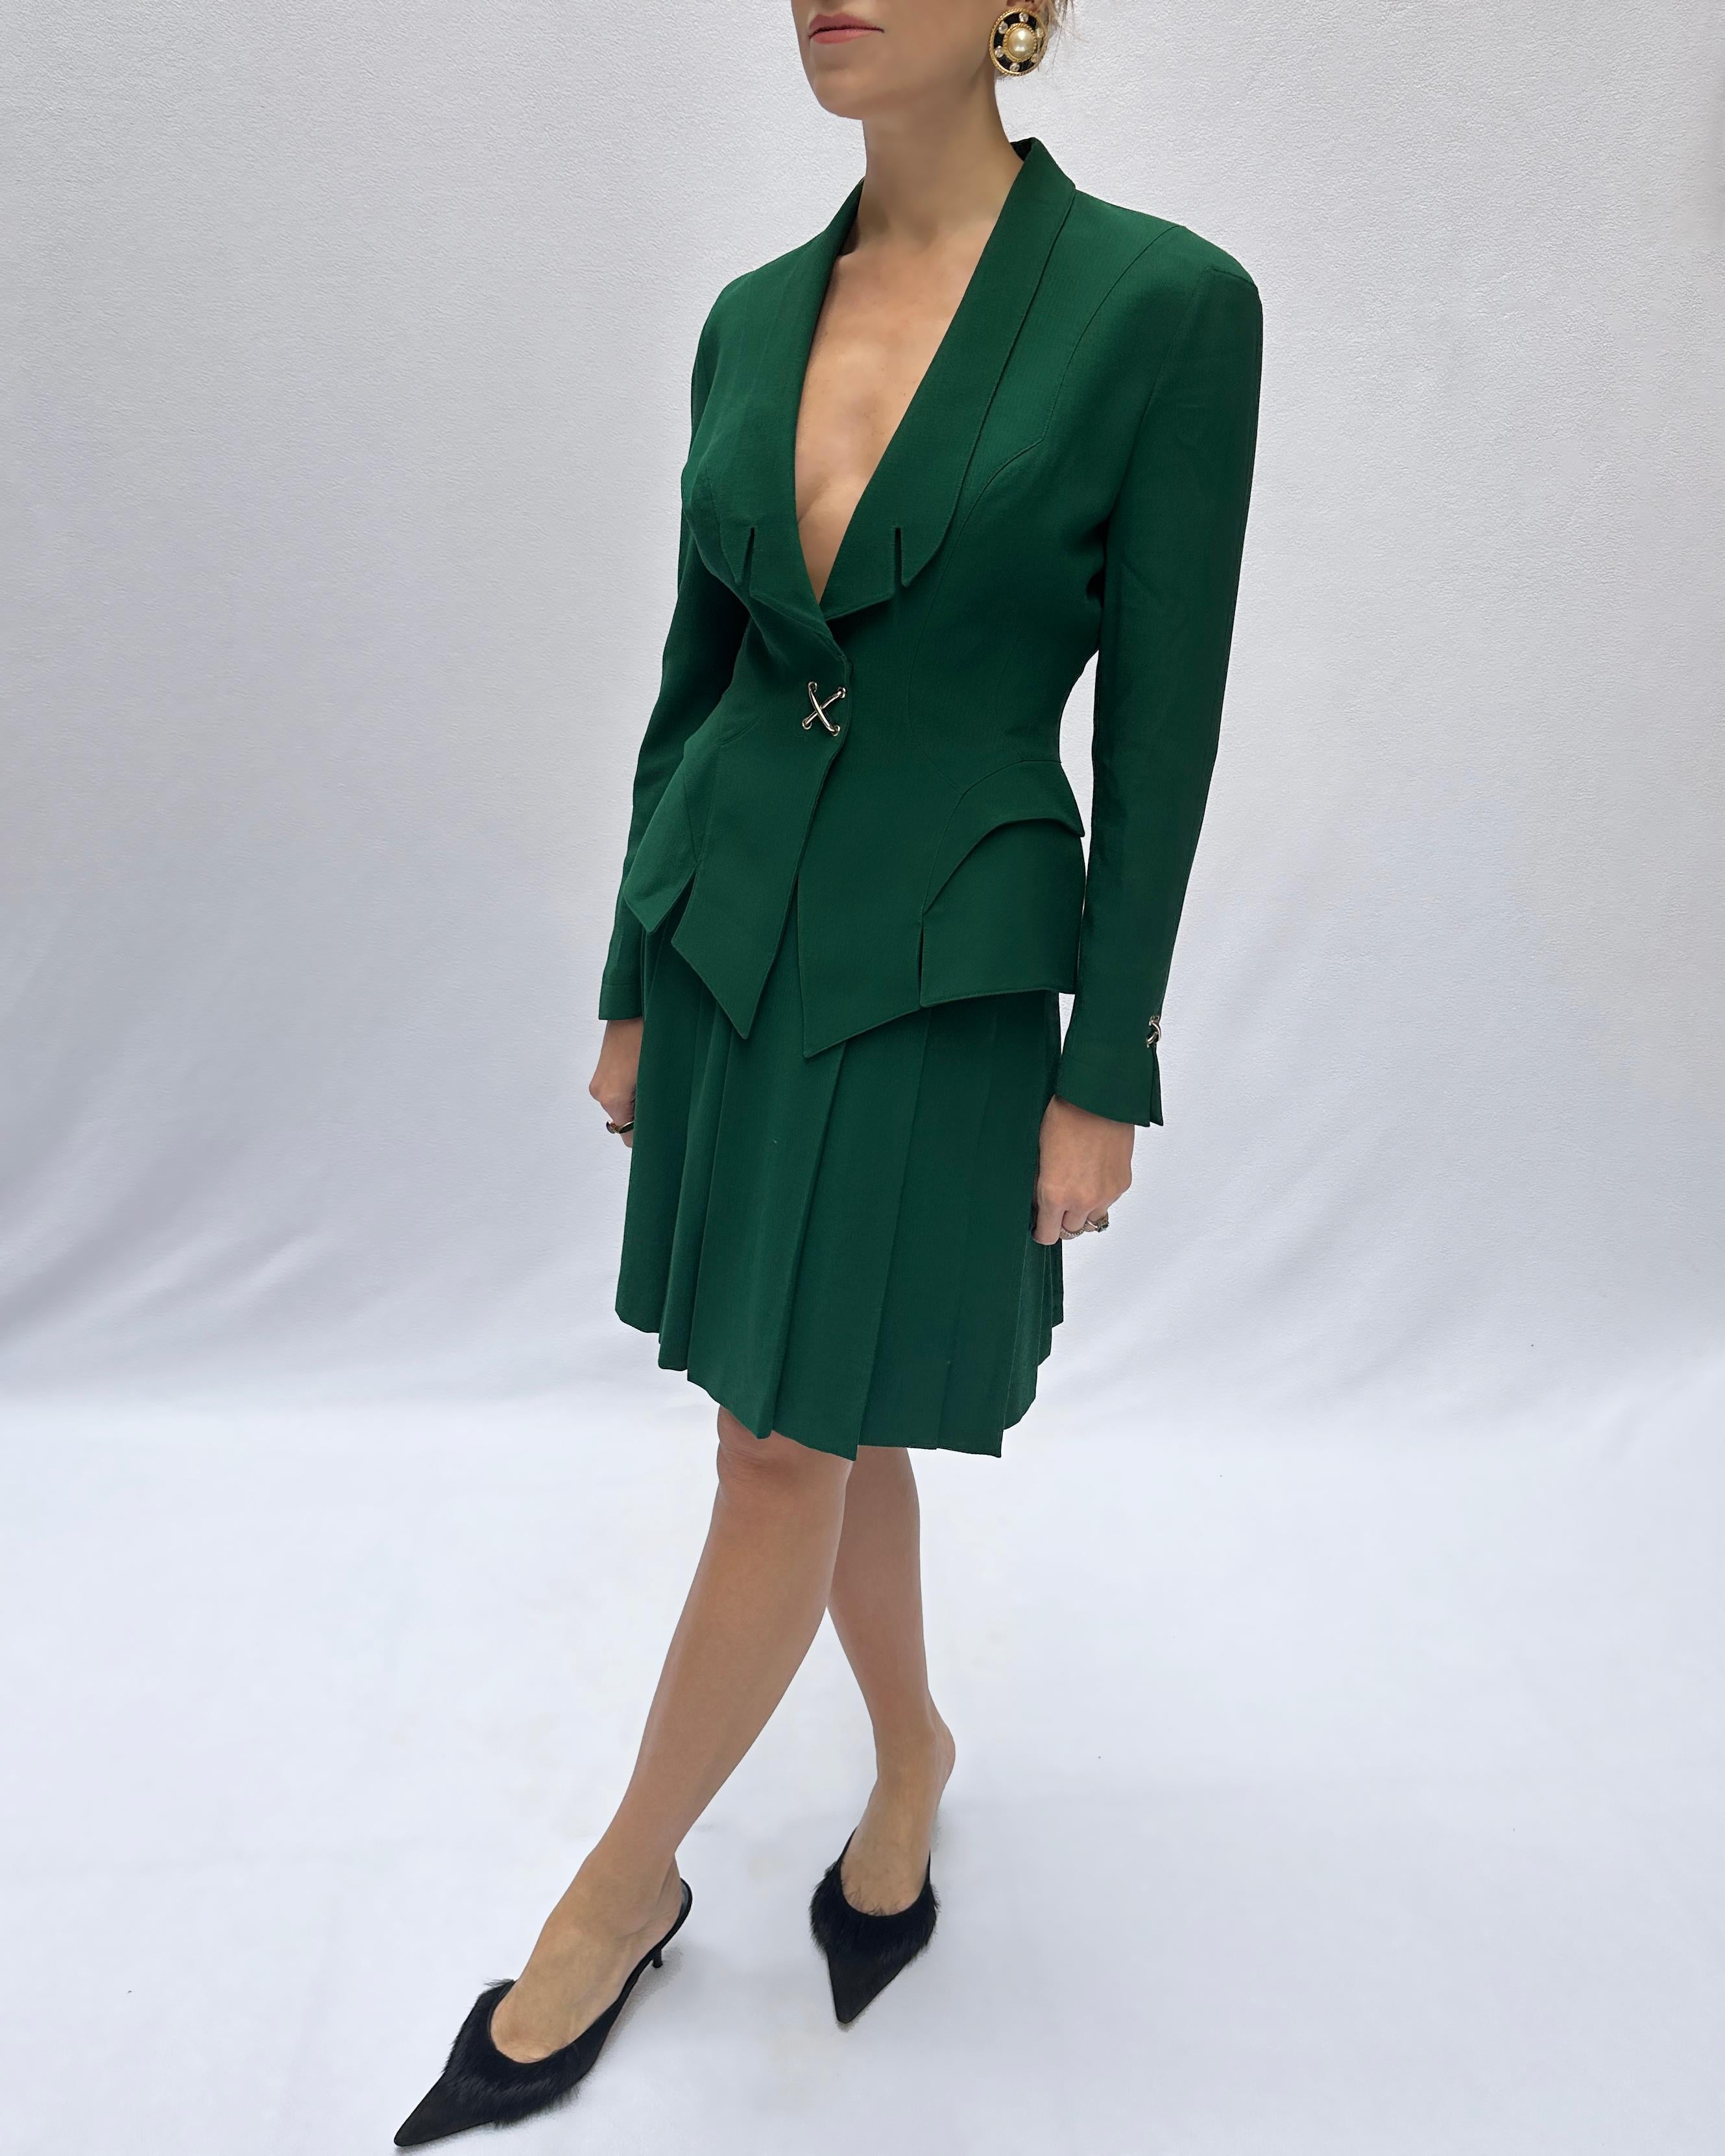 Vintage Thierry Mugler Fall 1992 Emerald Jacket + Pleated Skirt Suit In Excellent Condition For Sale In New York, NY